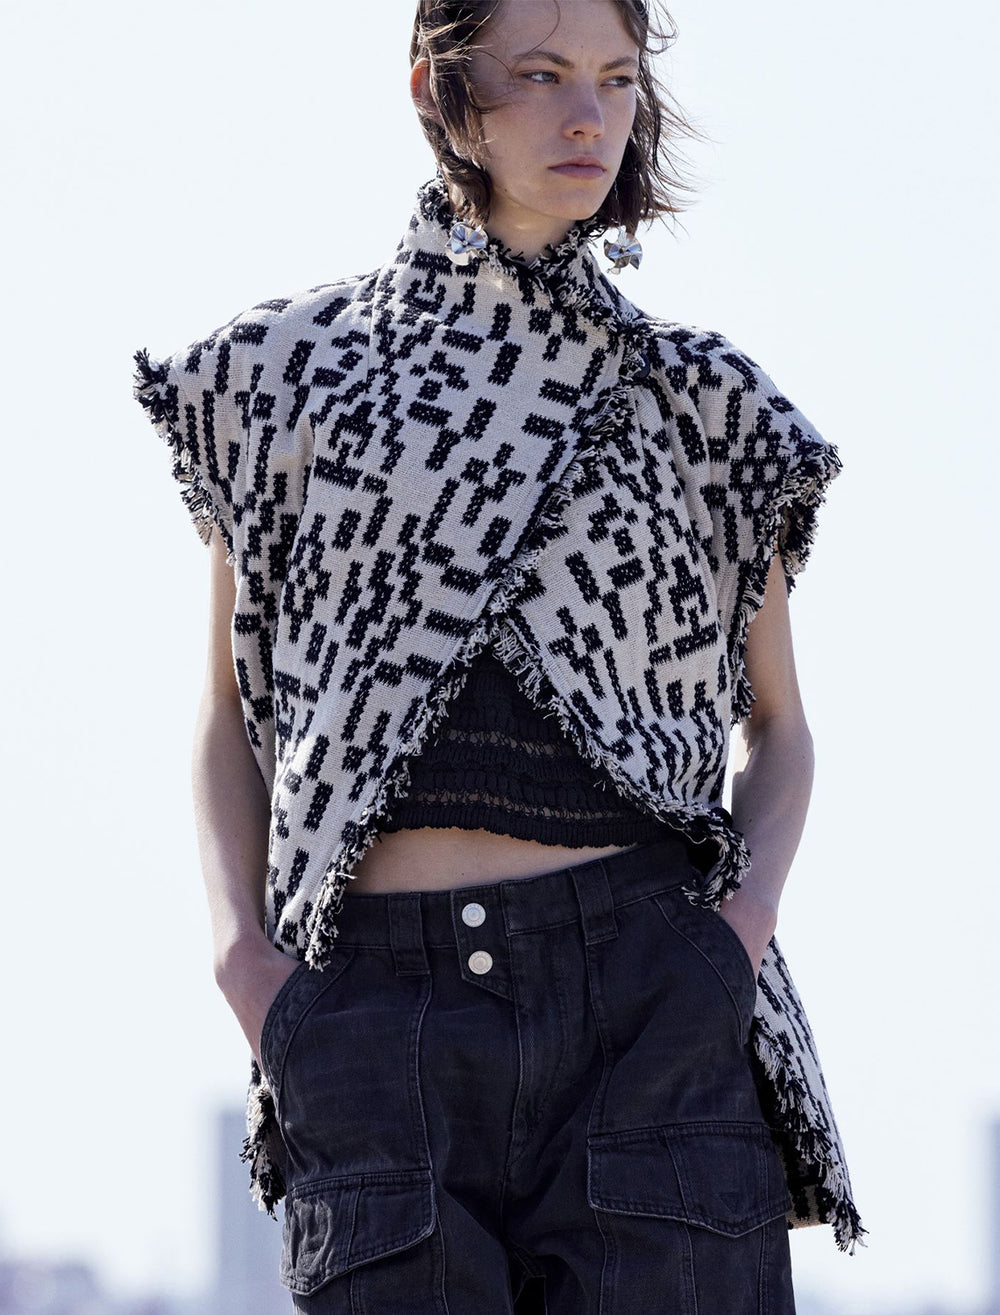 Model wearing Isabel Marant Etoile's faith jacket in black and white without sleeves attached.